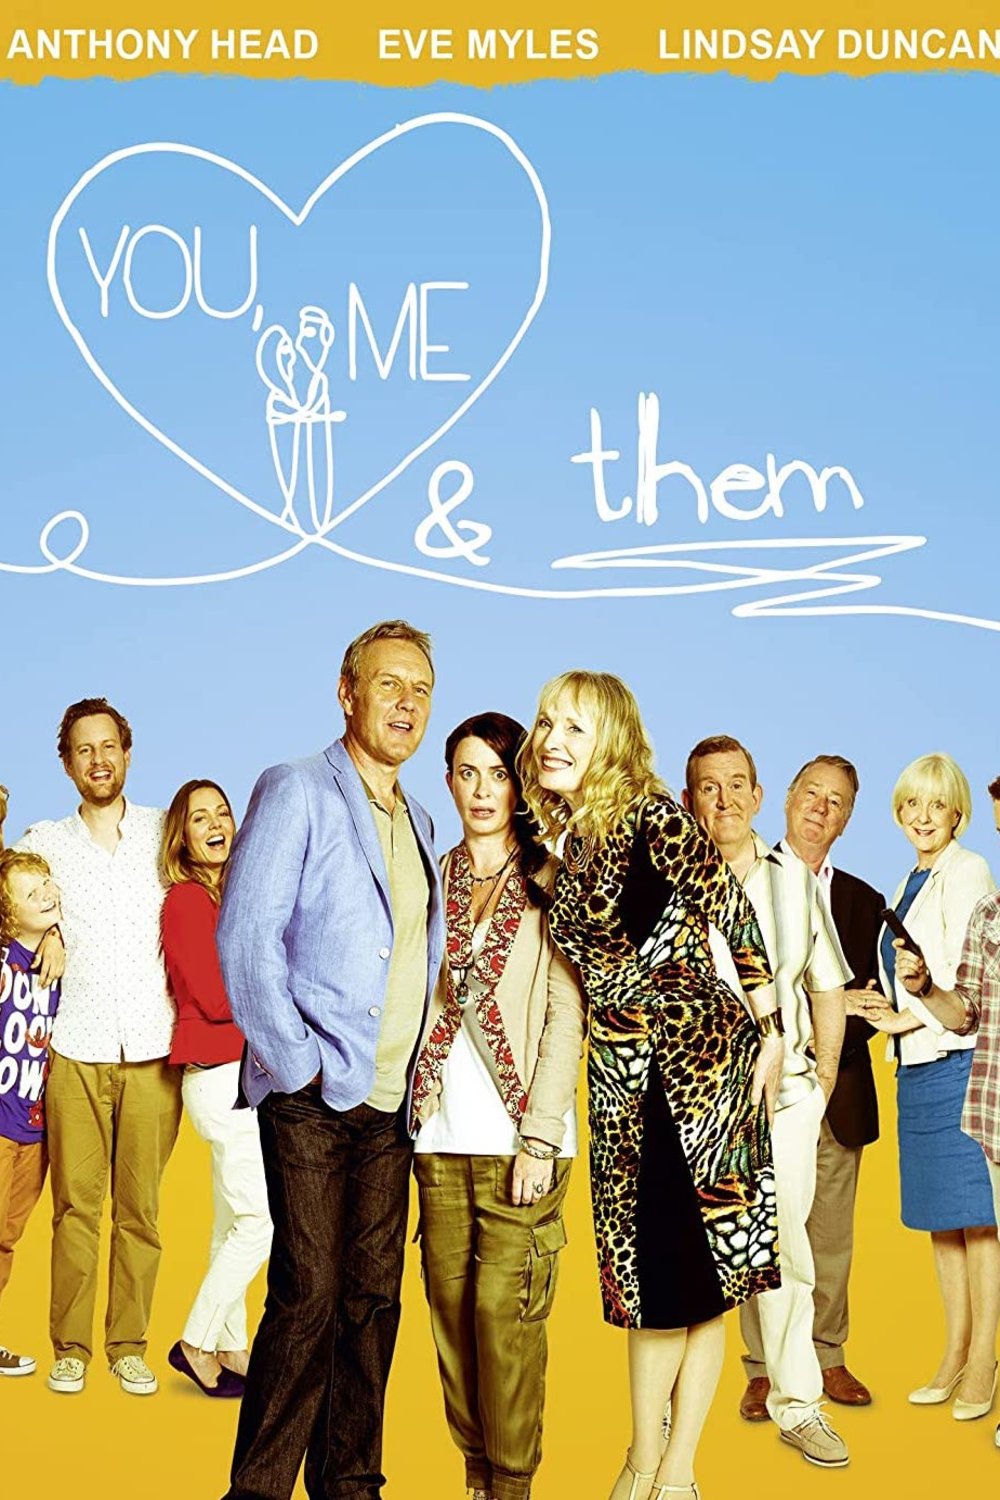 Poster of the movie You, Me & Them